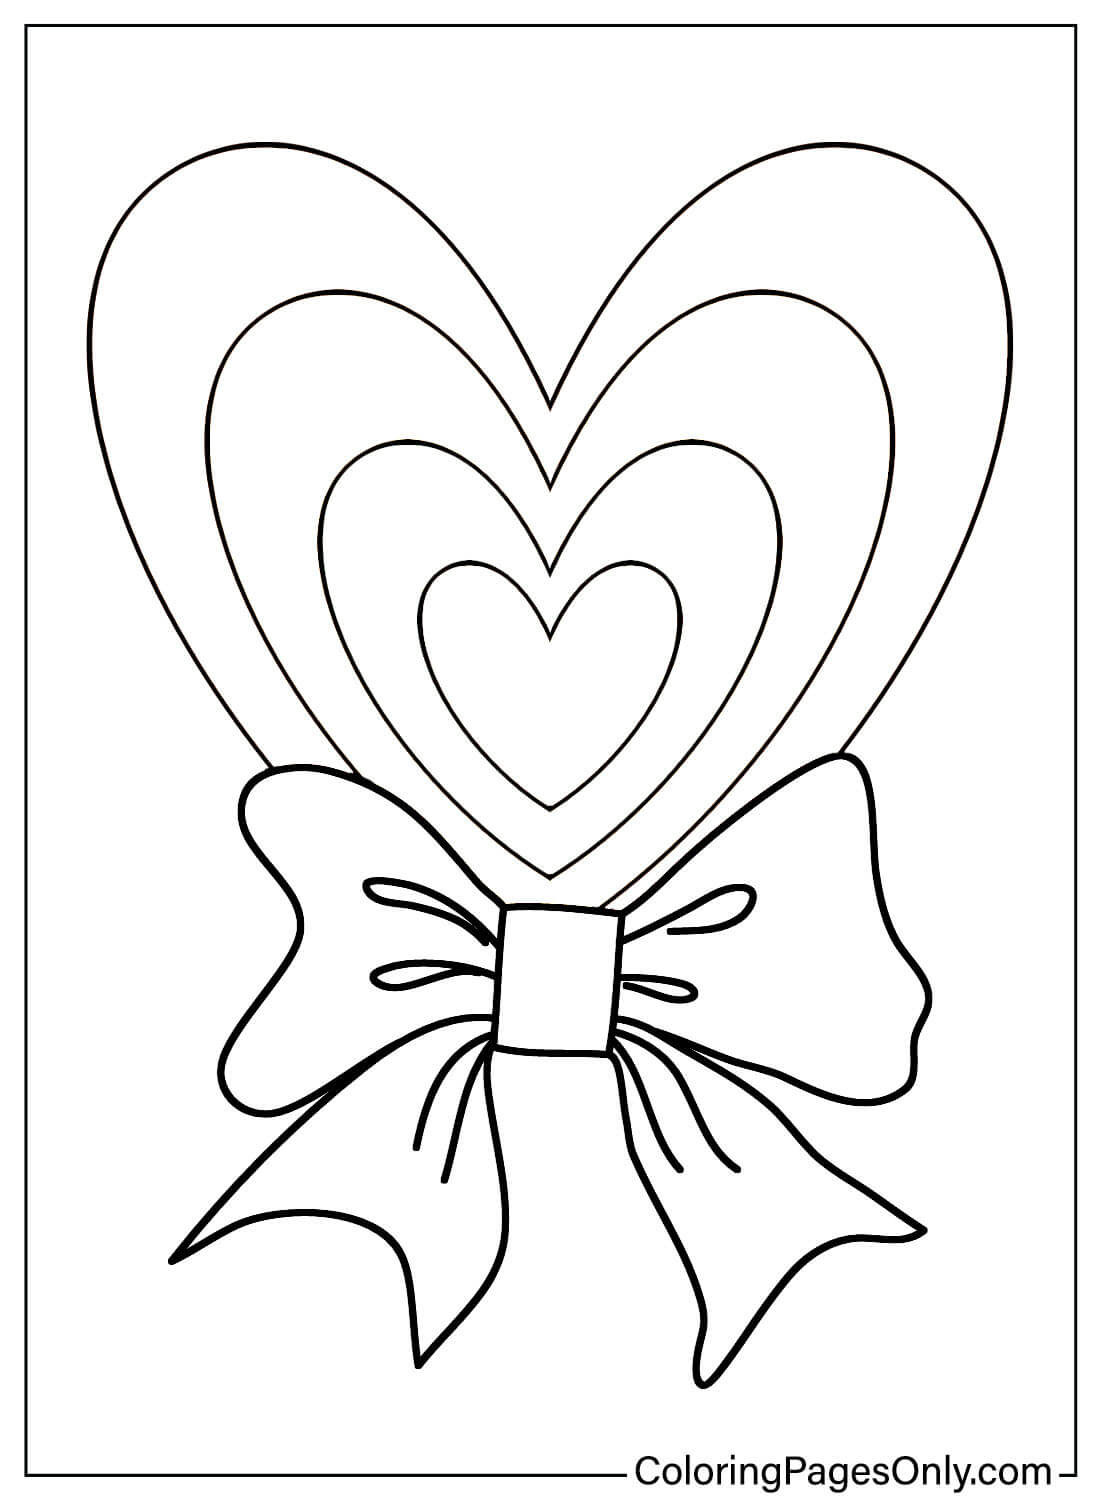 Coloring Page Bow from Bow